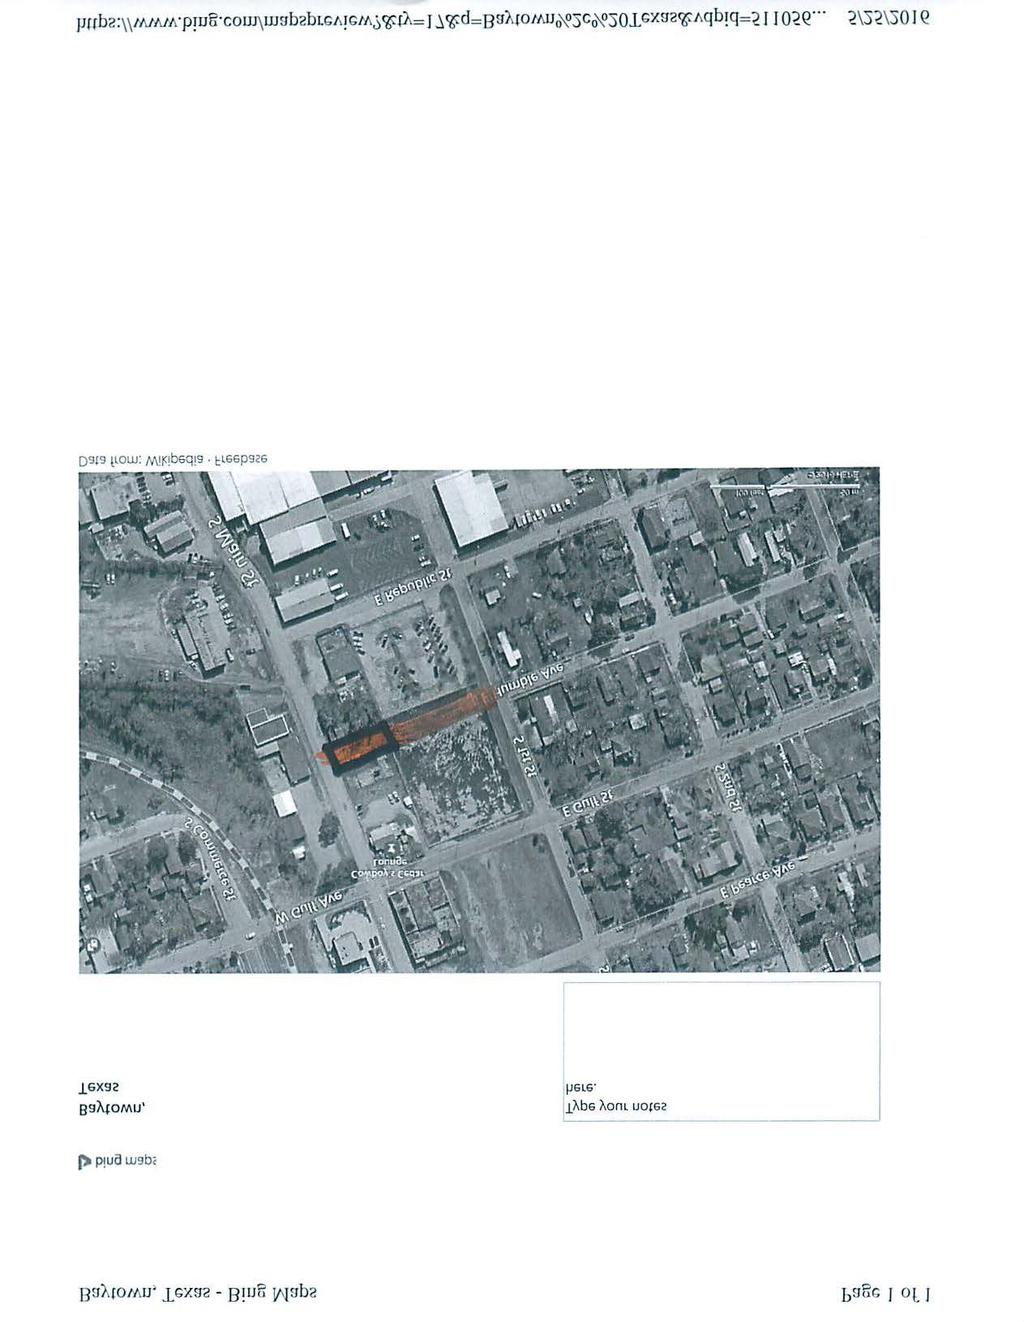 CITY OF BAYTOWN -SPECIFICATIONS- SALE OF CITY PROPERTY: THE RIGHT-OF-WAY OF EAST HUMBLE AVENUE CONSISTING OF 5,000 SQUARE FEET OF RIGHT-OF-WAY, 50 FEET WIDE AND 100 FEET LONG - LOCATED EAST OF SOUTH